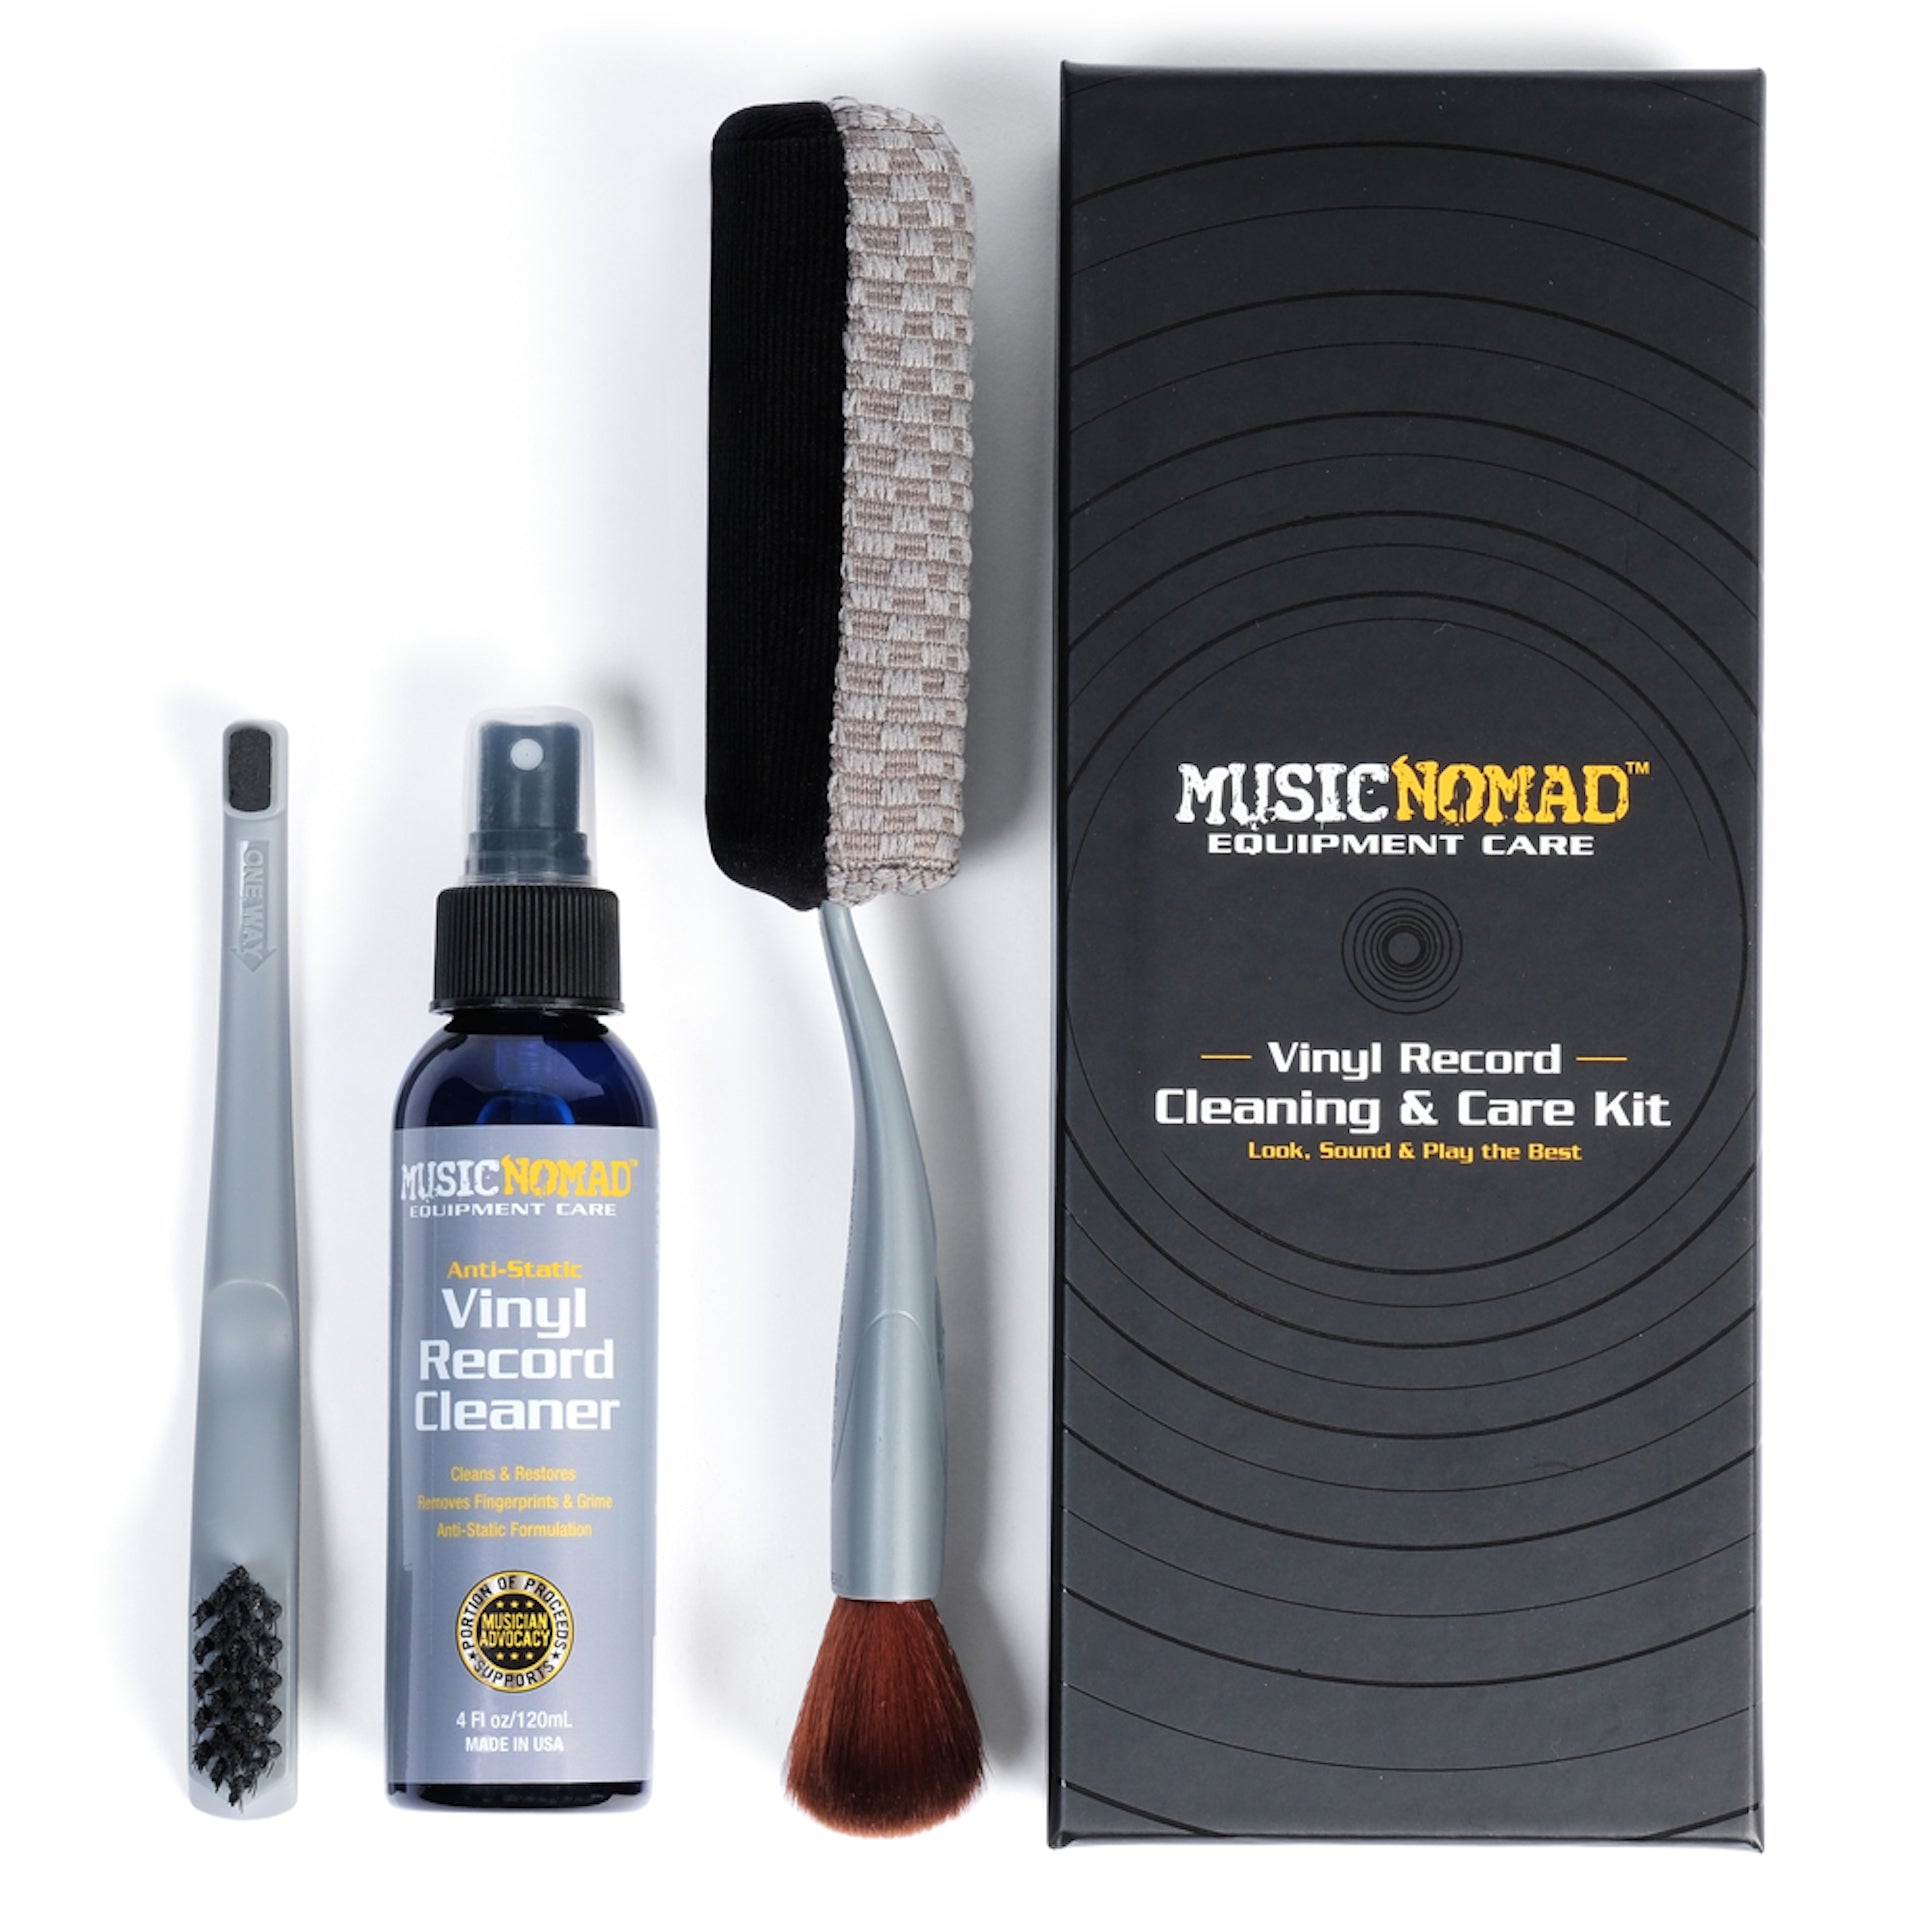 MUSIC NOMAD 6 'n 1 Vinyl Record Cleaning & Care Kit MN890